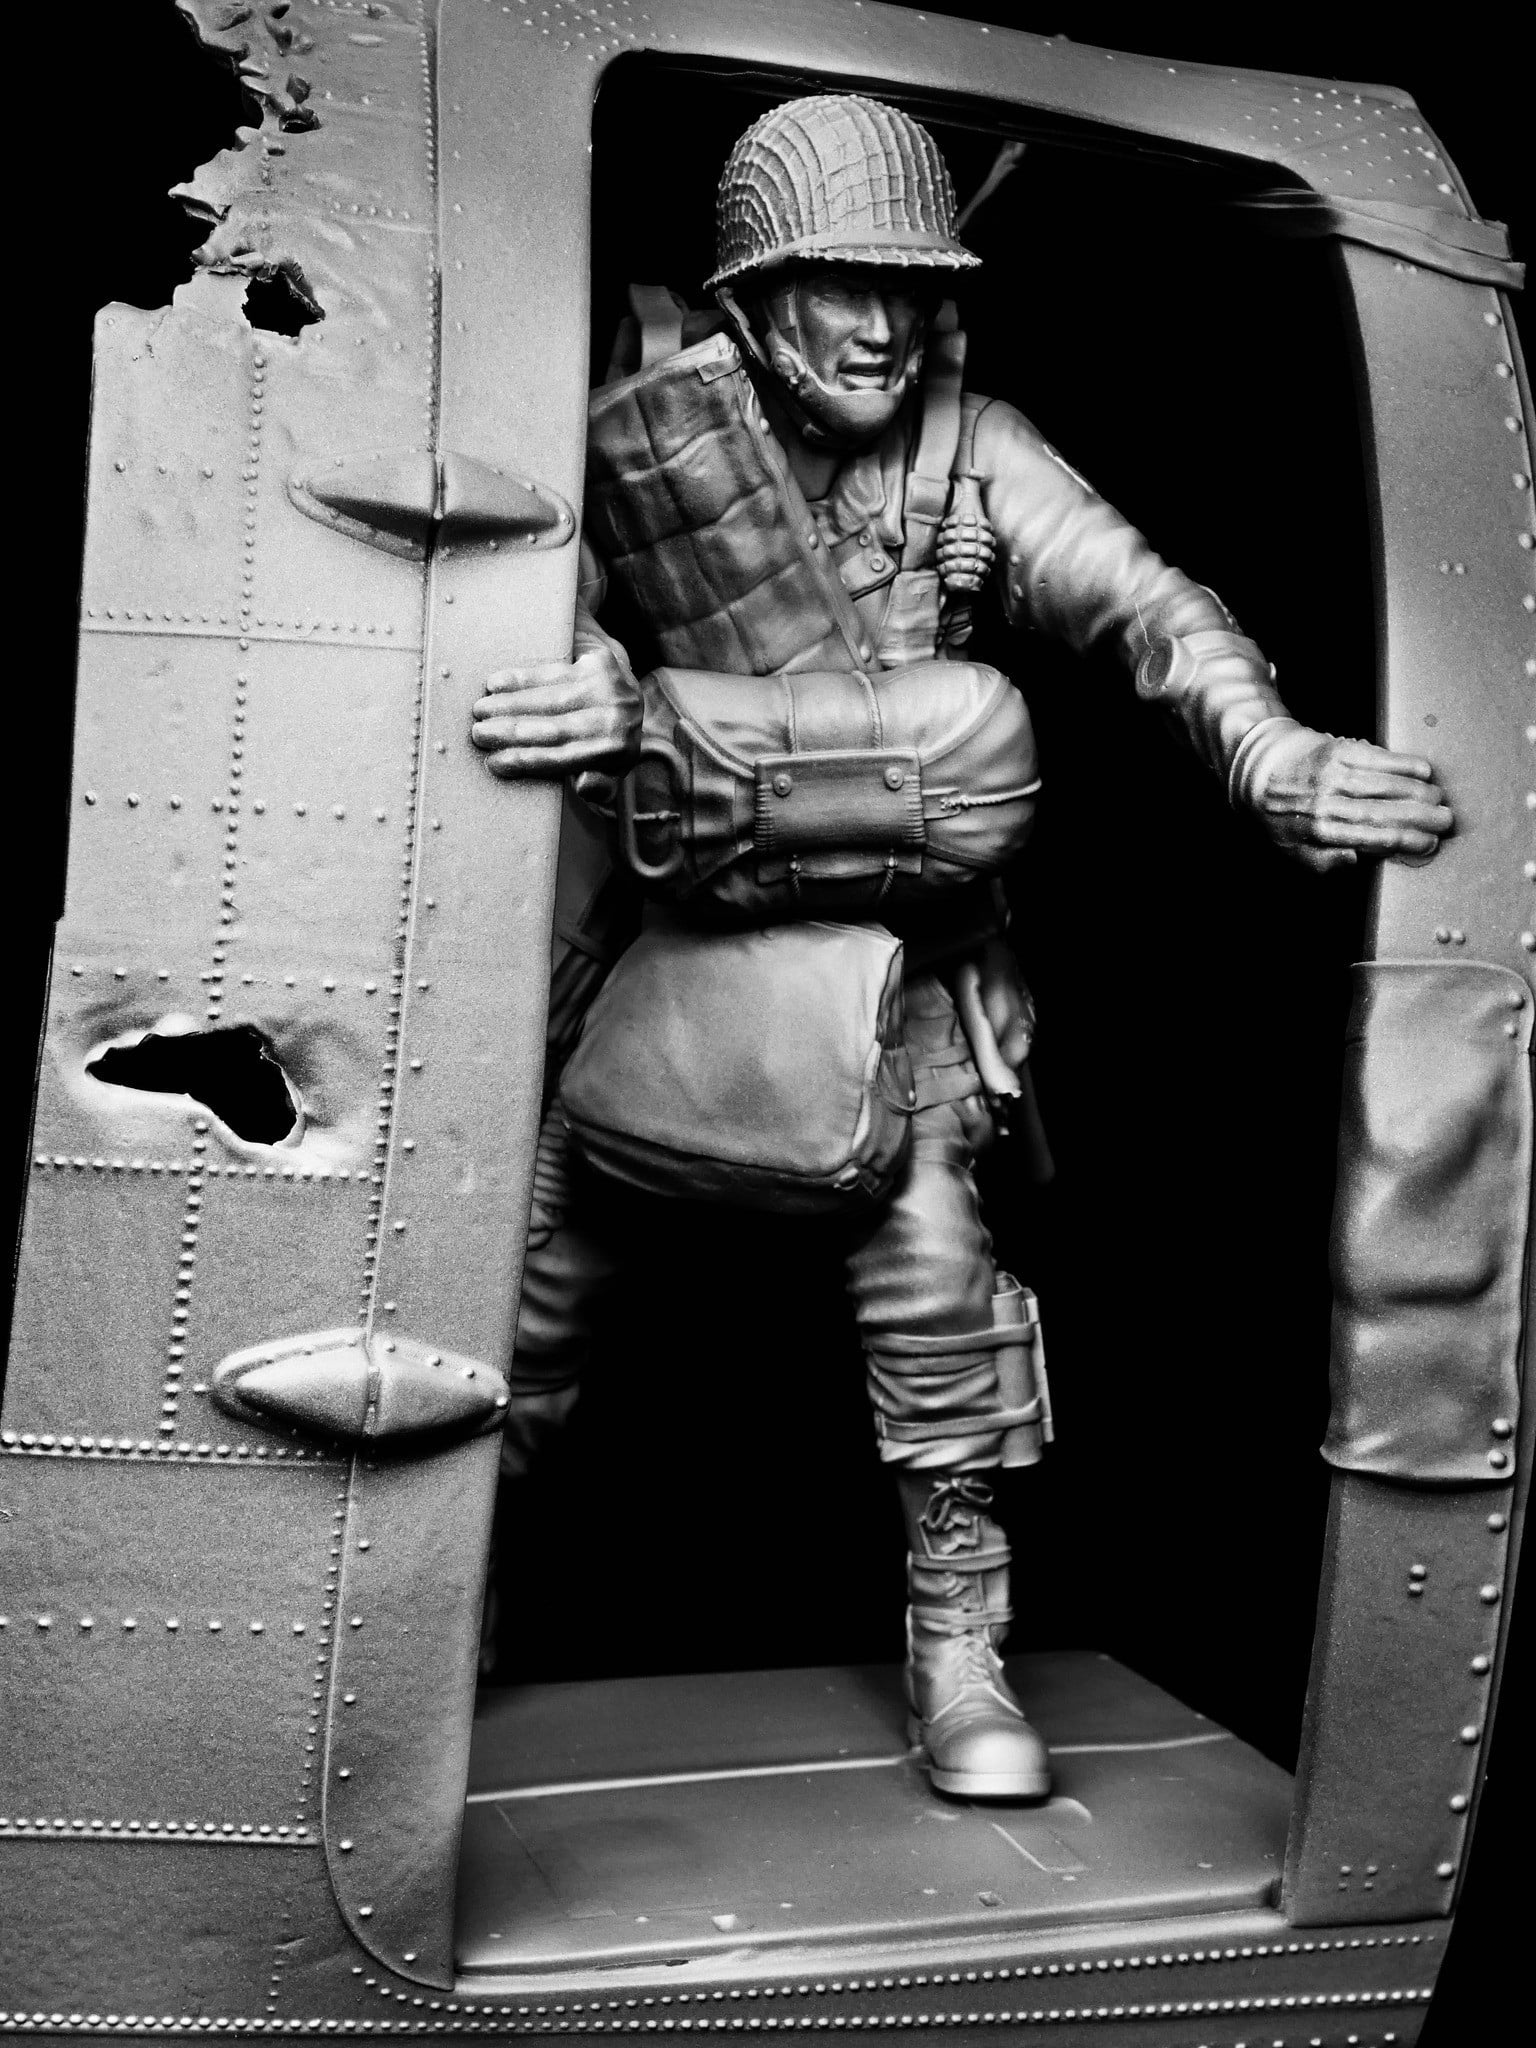 Mitches Military Models Releases 200mm WWII US Paratrooper Kit